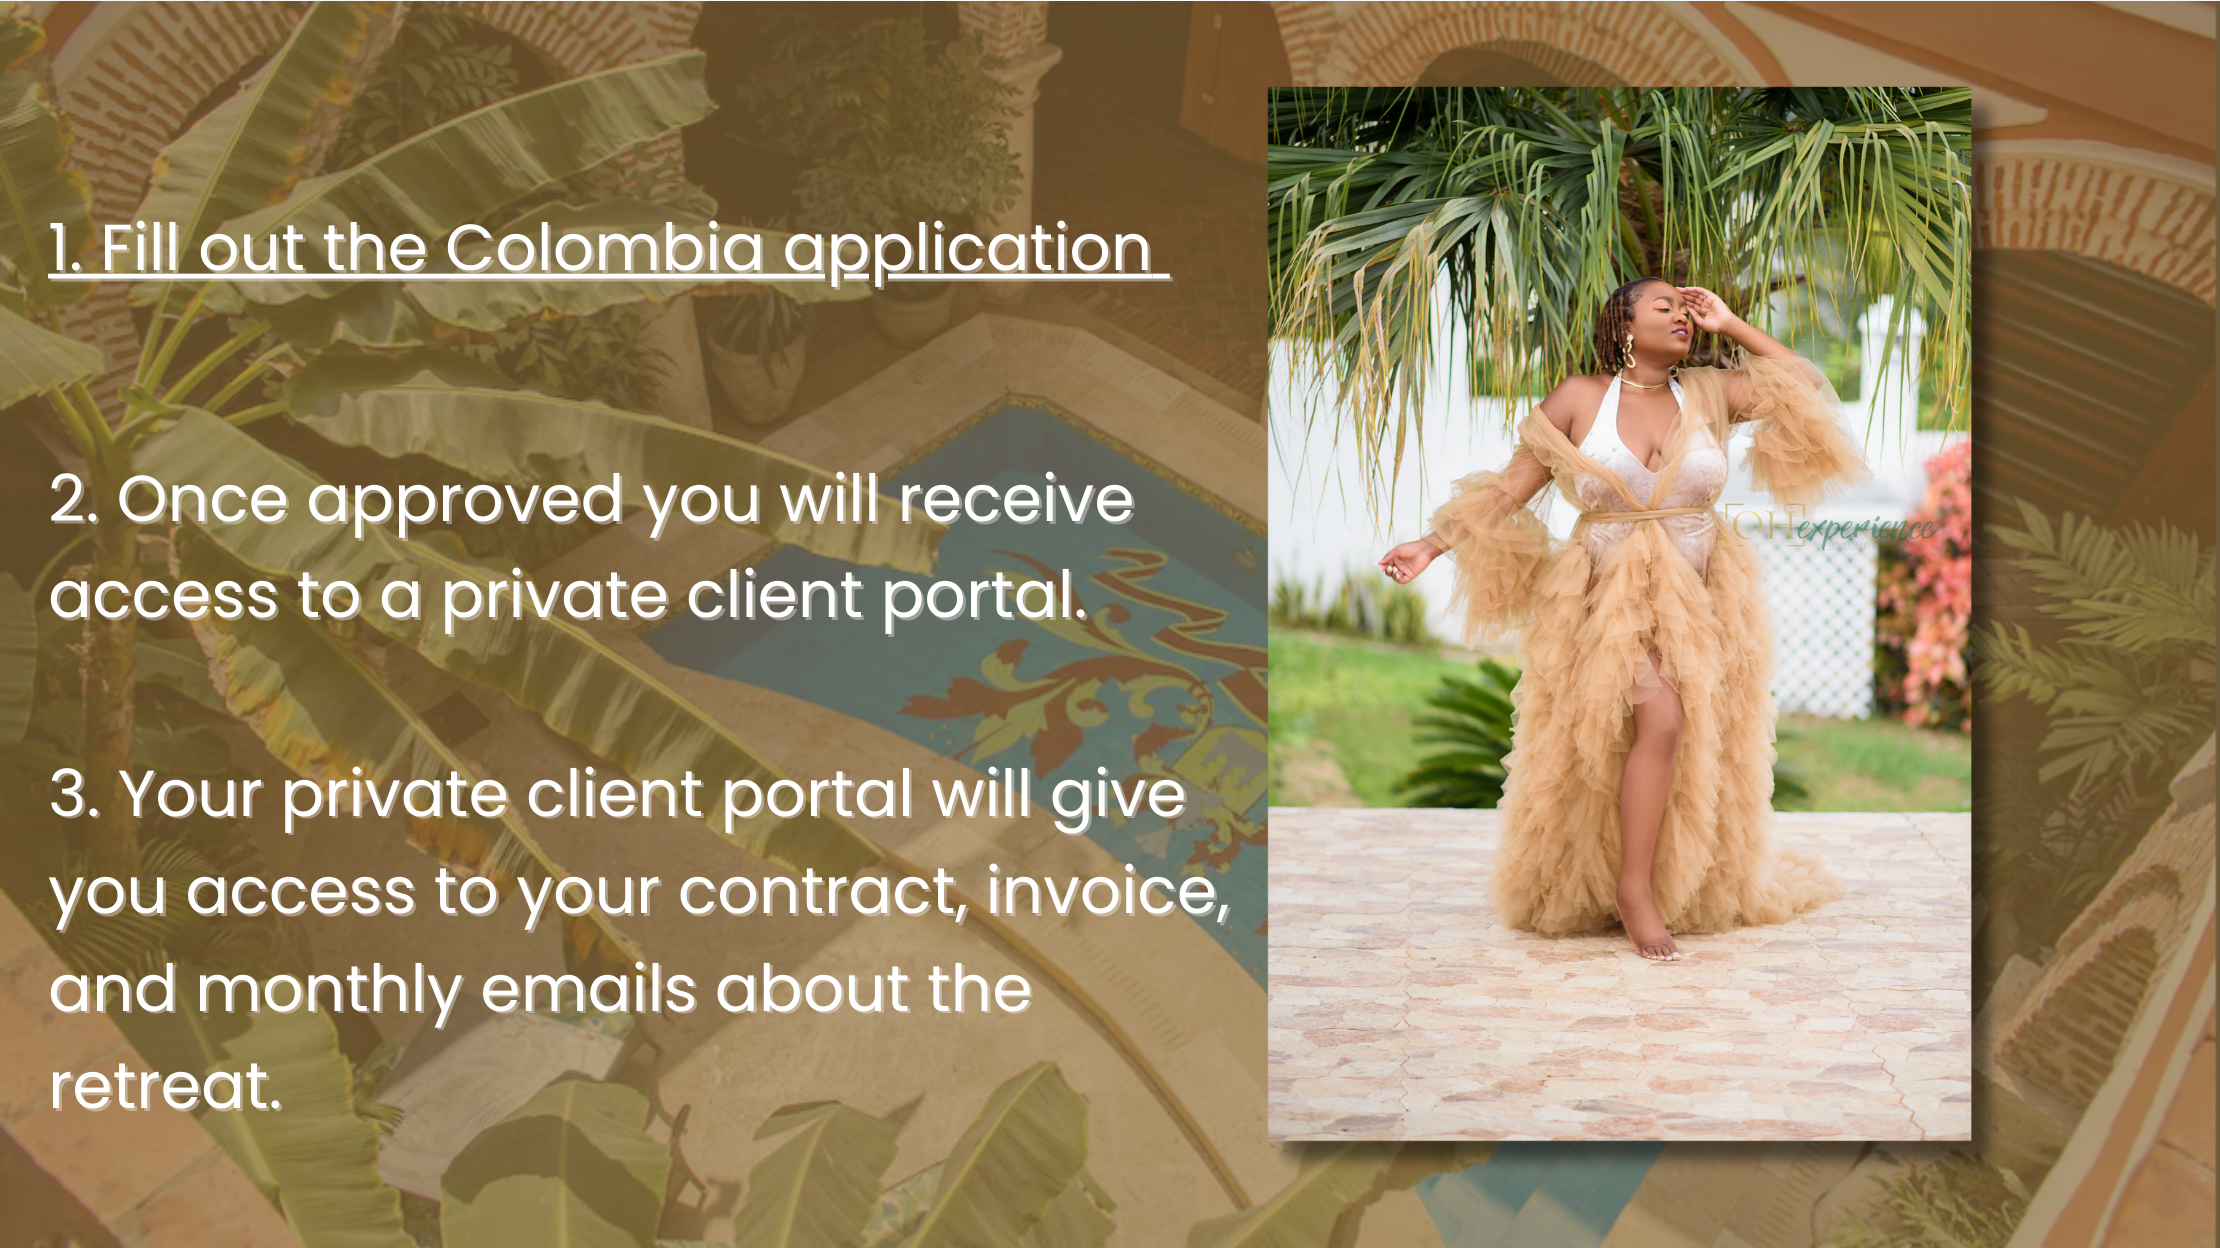 1. Fill out the Colombia application 2. Once approved you will receive access to a private client portal. 3. Your private client portal will give you access to your contract, invoice, and monthly emails about the retreat.